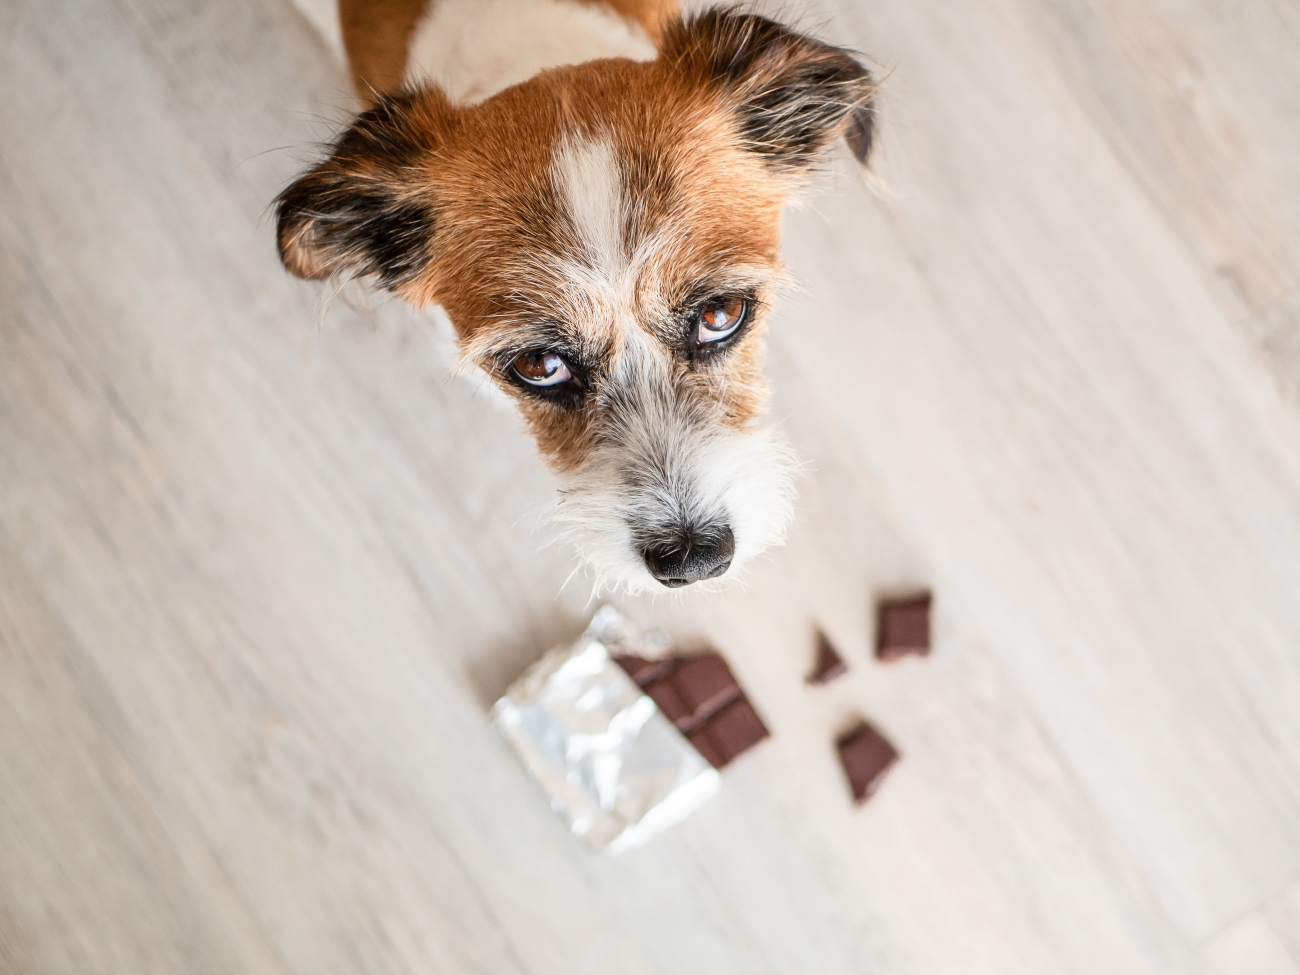 a dog looking up sadly standing over chocolate